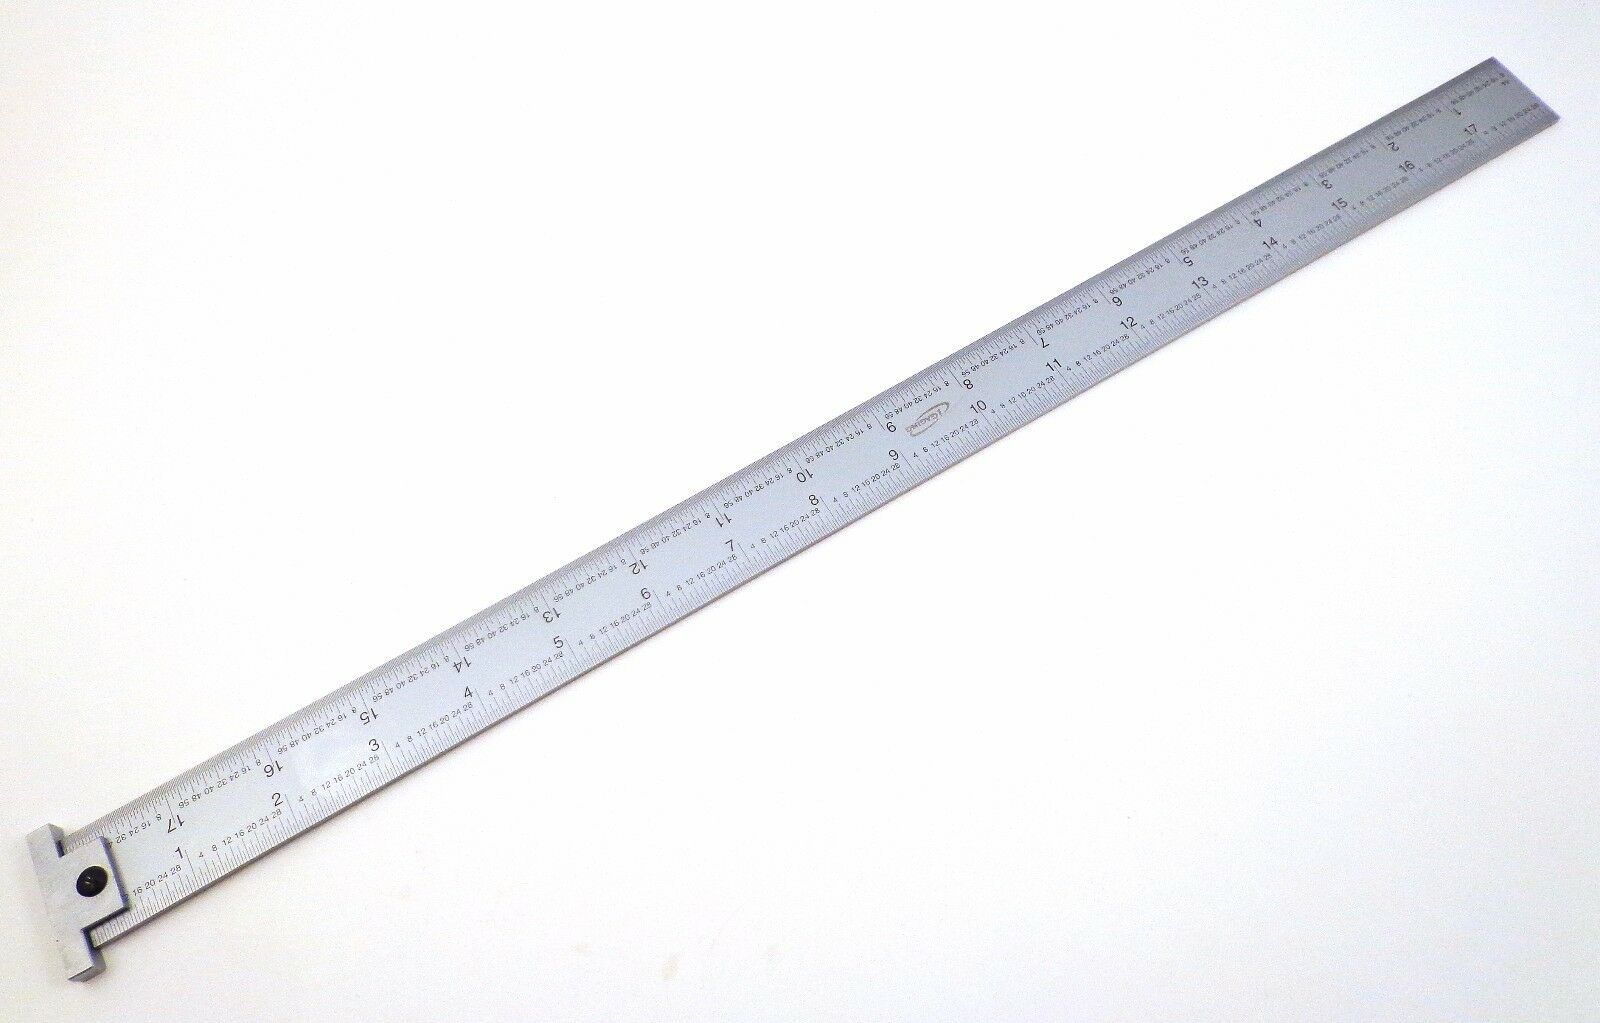 Igaging 18" Machinist Hook Ruler / Rule 4R with 1/8, 1/16, 1/32, 1/64 grads